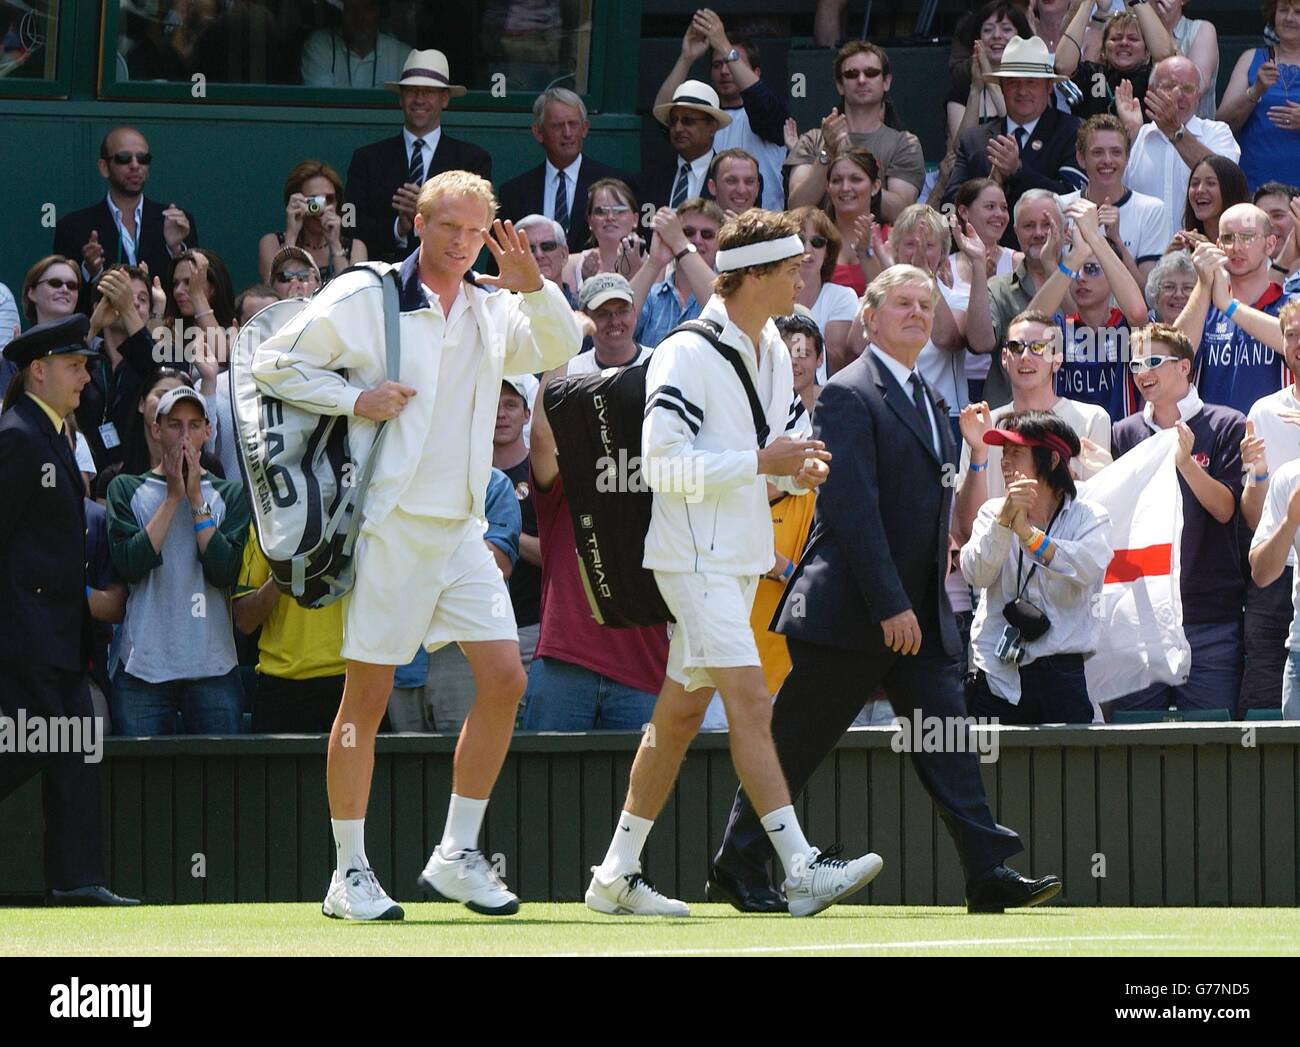 British actor Paul Bettany waves as he walks onto Wimbledon's Centre Court at the All England Lawn Tennis Championships during filming for a movie about the world famous tournament which he stars in with Spiderman actress Kirsten Dunst. The actor also featured alongside Russell Crow in 'A Beautiful Mind'. Stock Photo